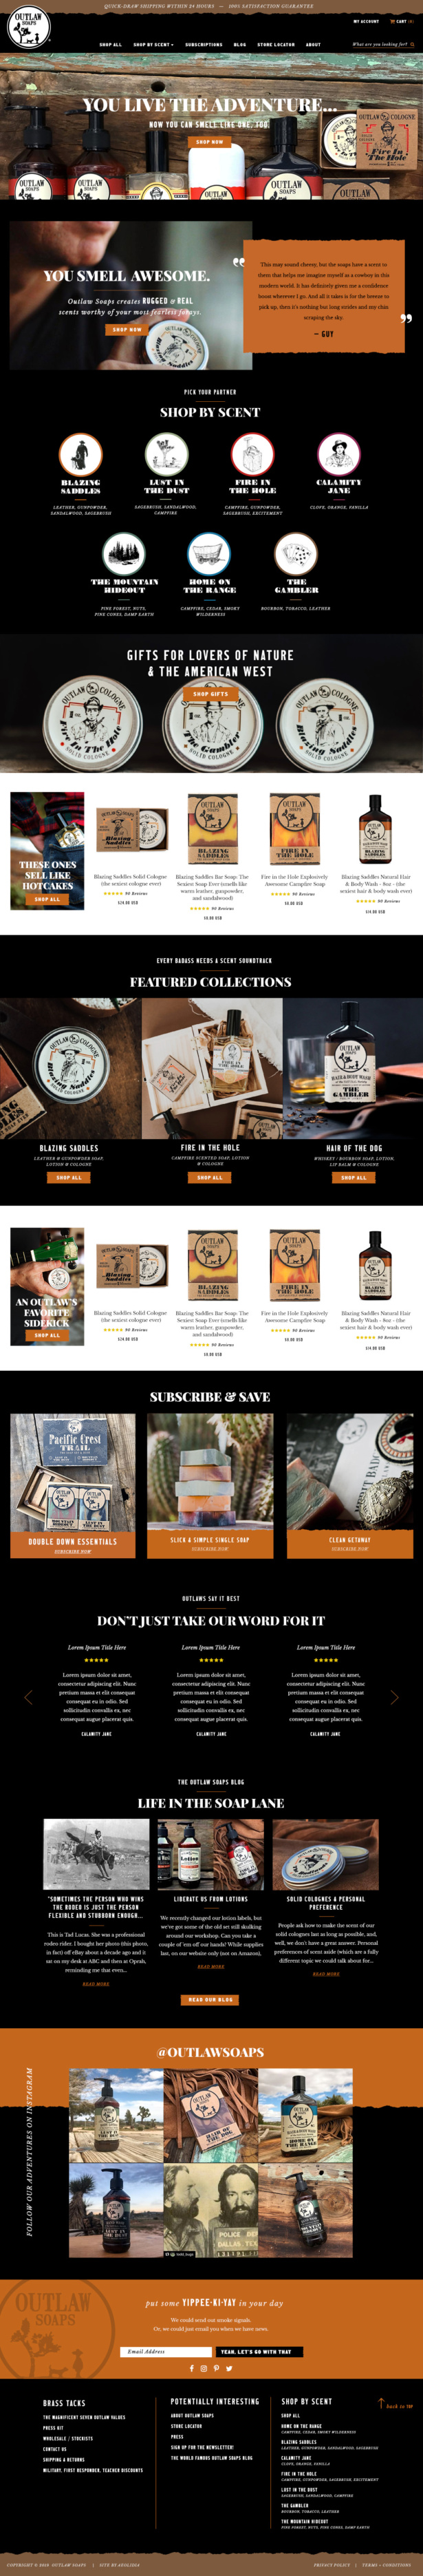 Outlaw Soaps custom Shopify blog page design for soap company